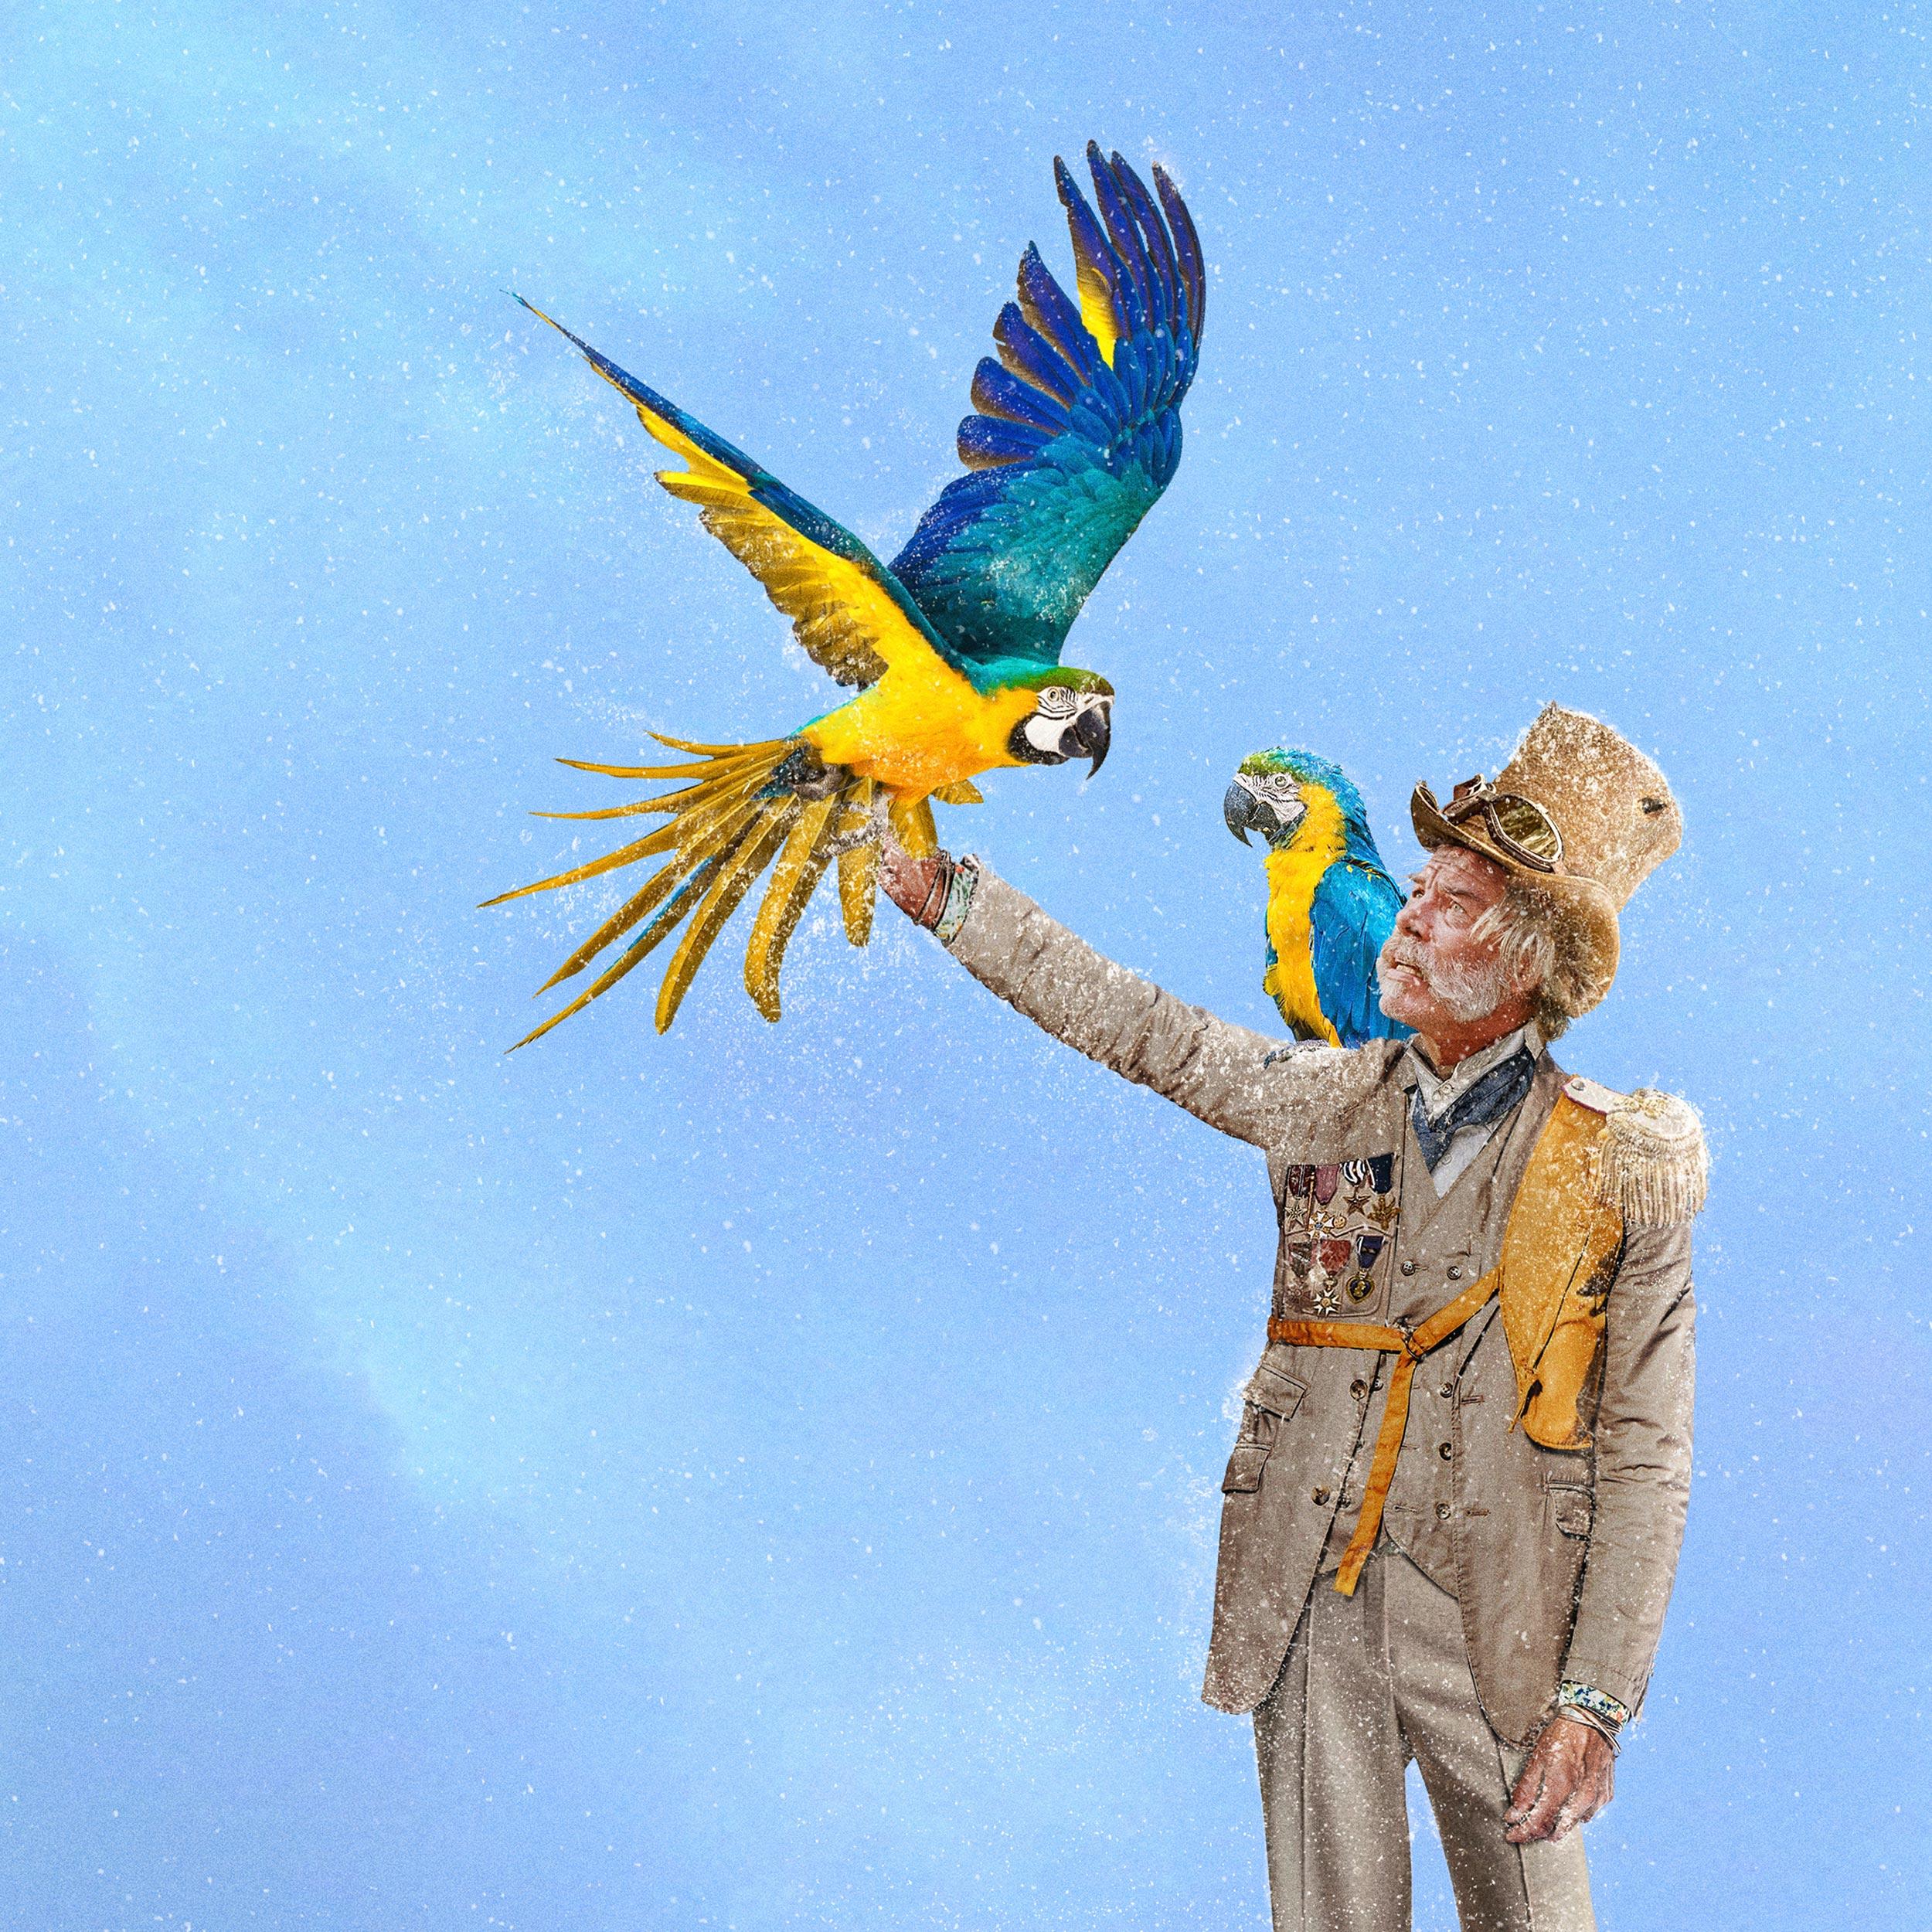 Bird charmer - Contemporary whimsical digital photo montage of a flying house  - Photograph by Laurent Chéhère